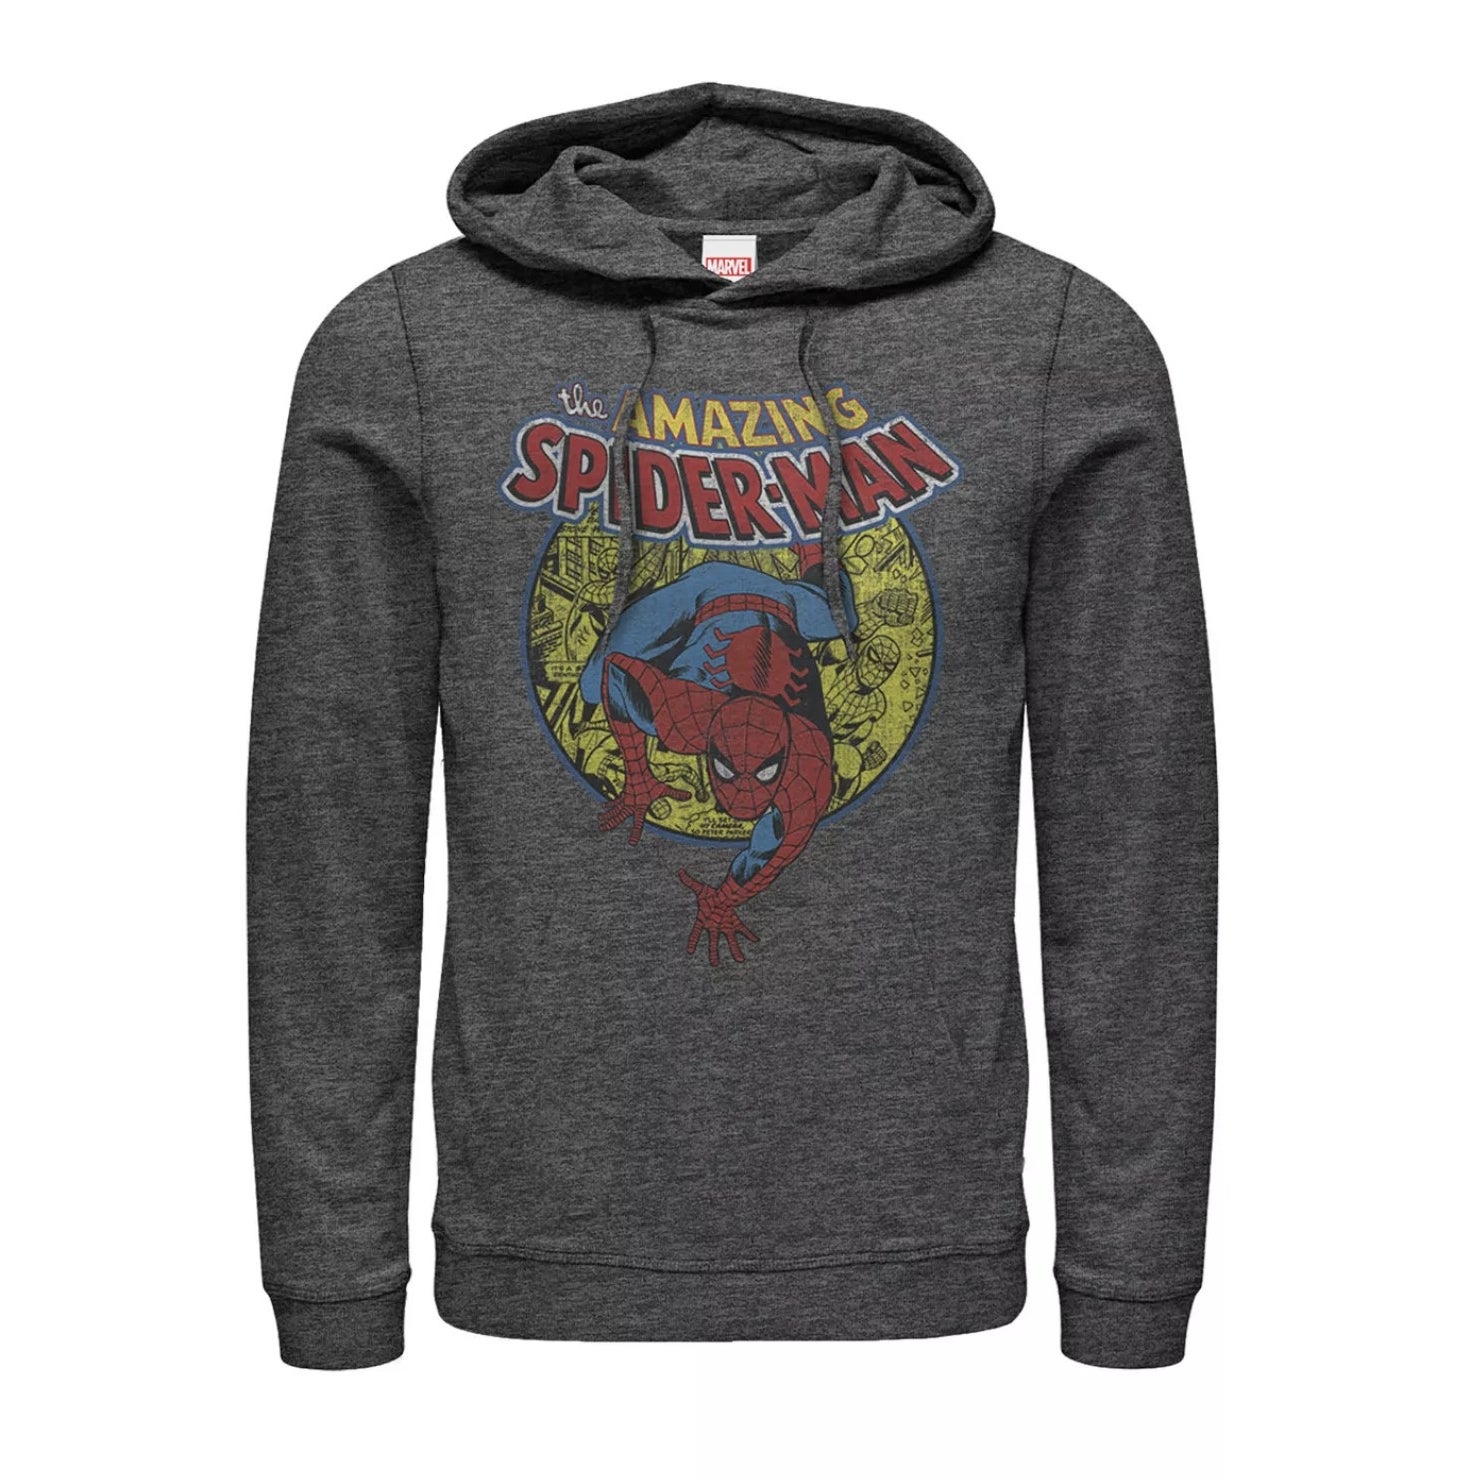 A grey pullover hoodie with a graphic of the amazing spiderman on the chest